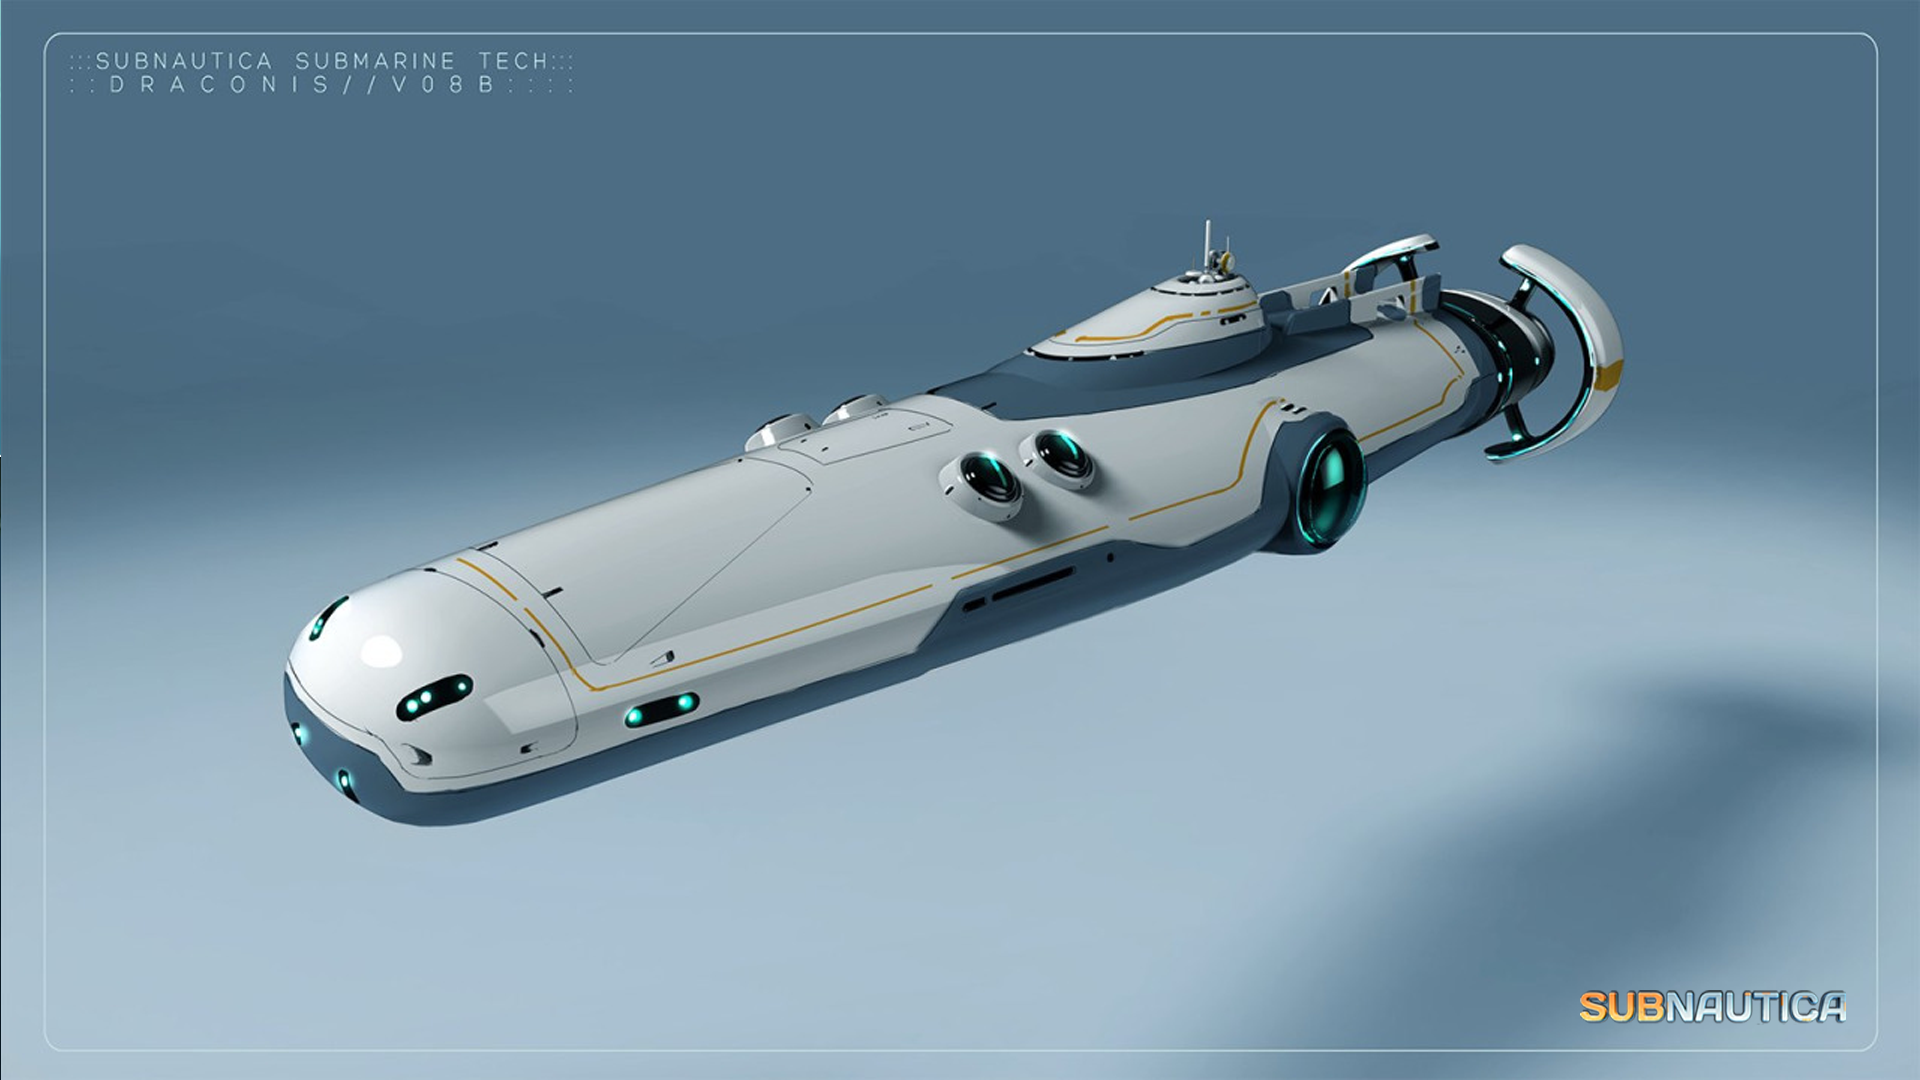 Image Submarine Concept Artpng Subnautica Wiki Fandom Powered By